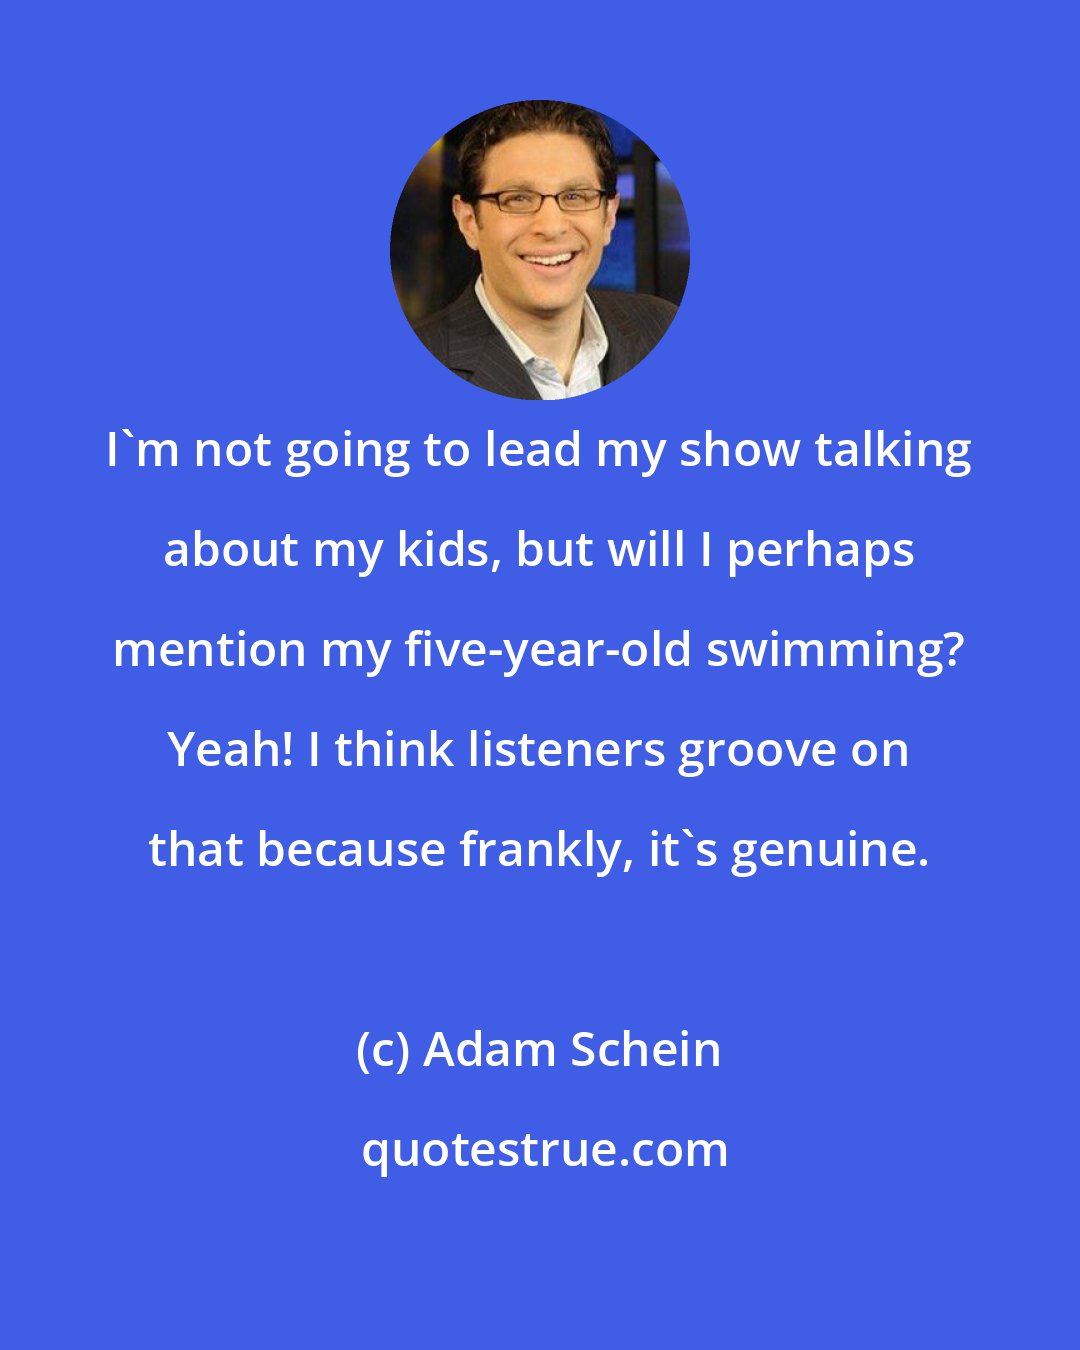 Adam Schein: I'm not going to lead my show talking about my kids, but will I perhaps mention my five-year-old swimming? Yeah! I think listeners groove on that because frankly, it's genuine.